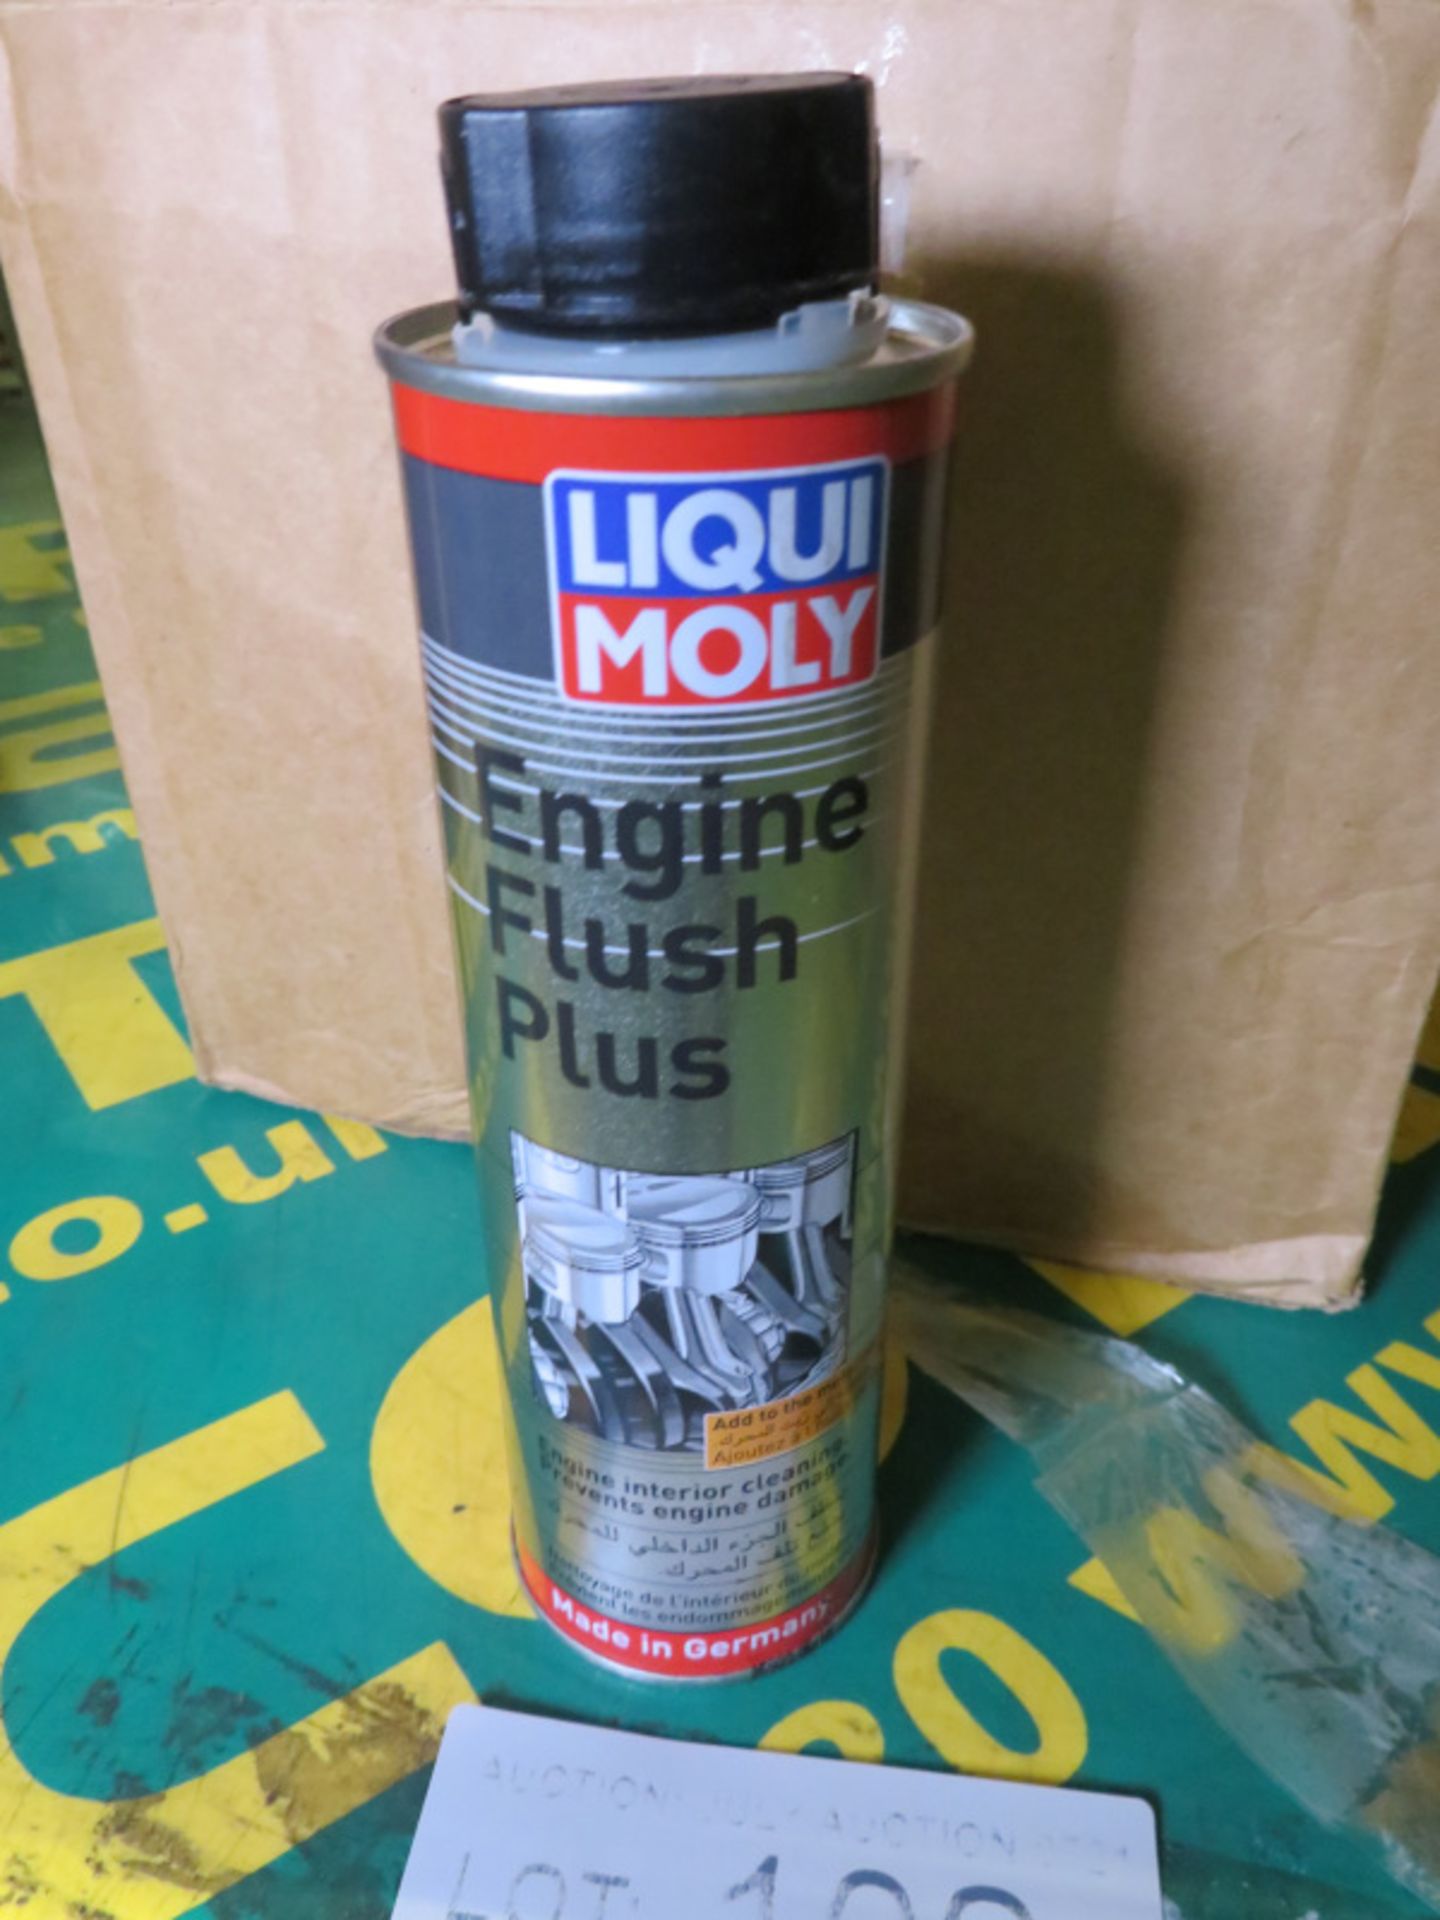 Liqui Moly fuel injection cleaner, Liqui Moly engine flush plus, Liqui Moly injection cleaner - Image 4 of 7